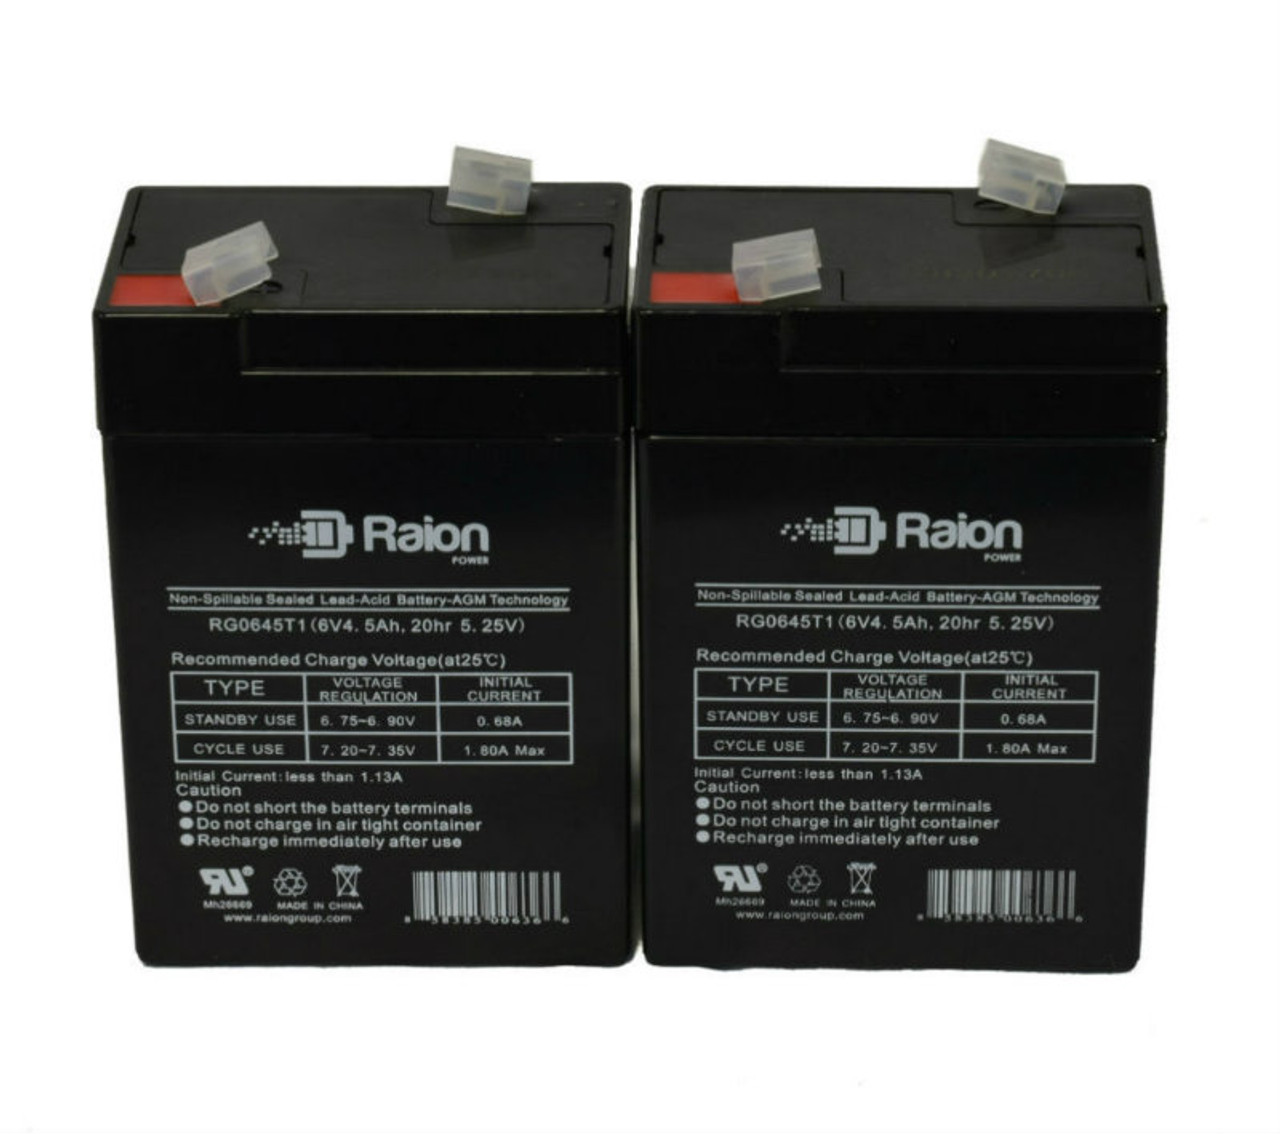 Raion Power 6 Volt 4.5Ah RG0645T1 Replacement Battery for Long Way LW-3FM3.5 - 2 Pack